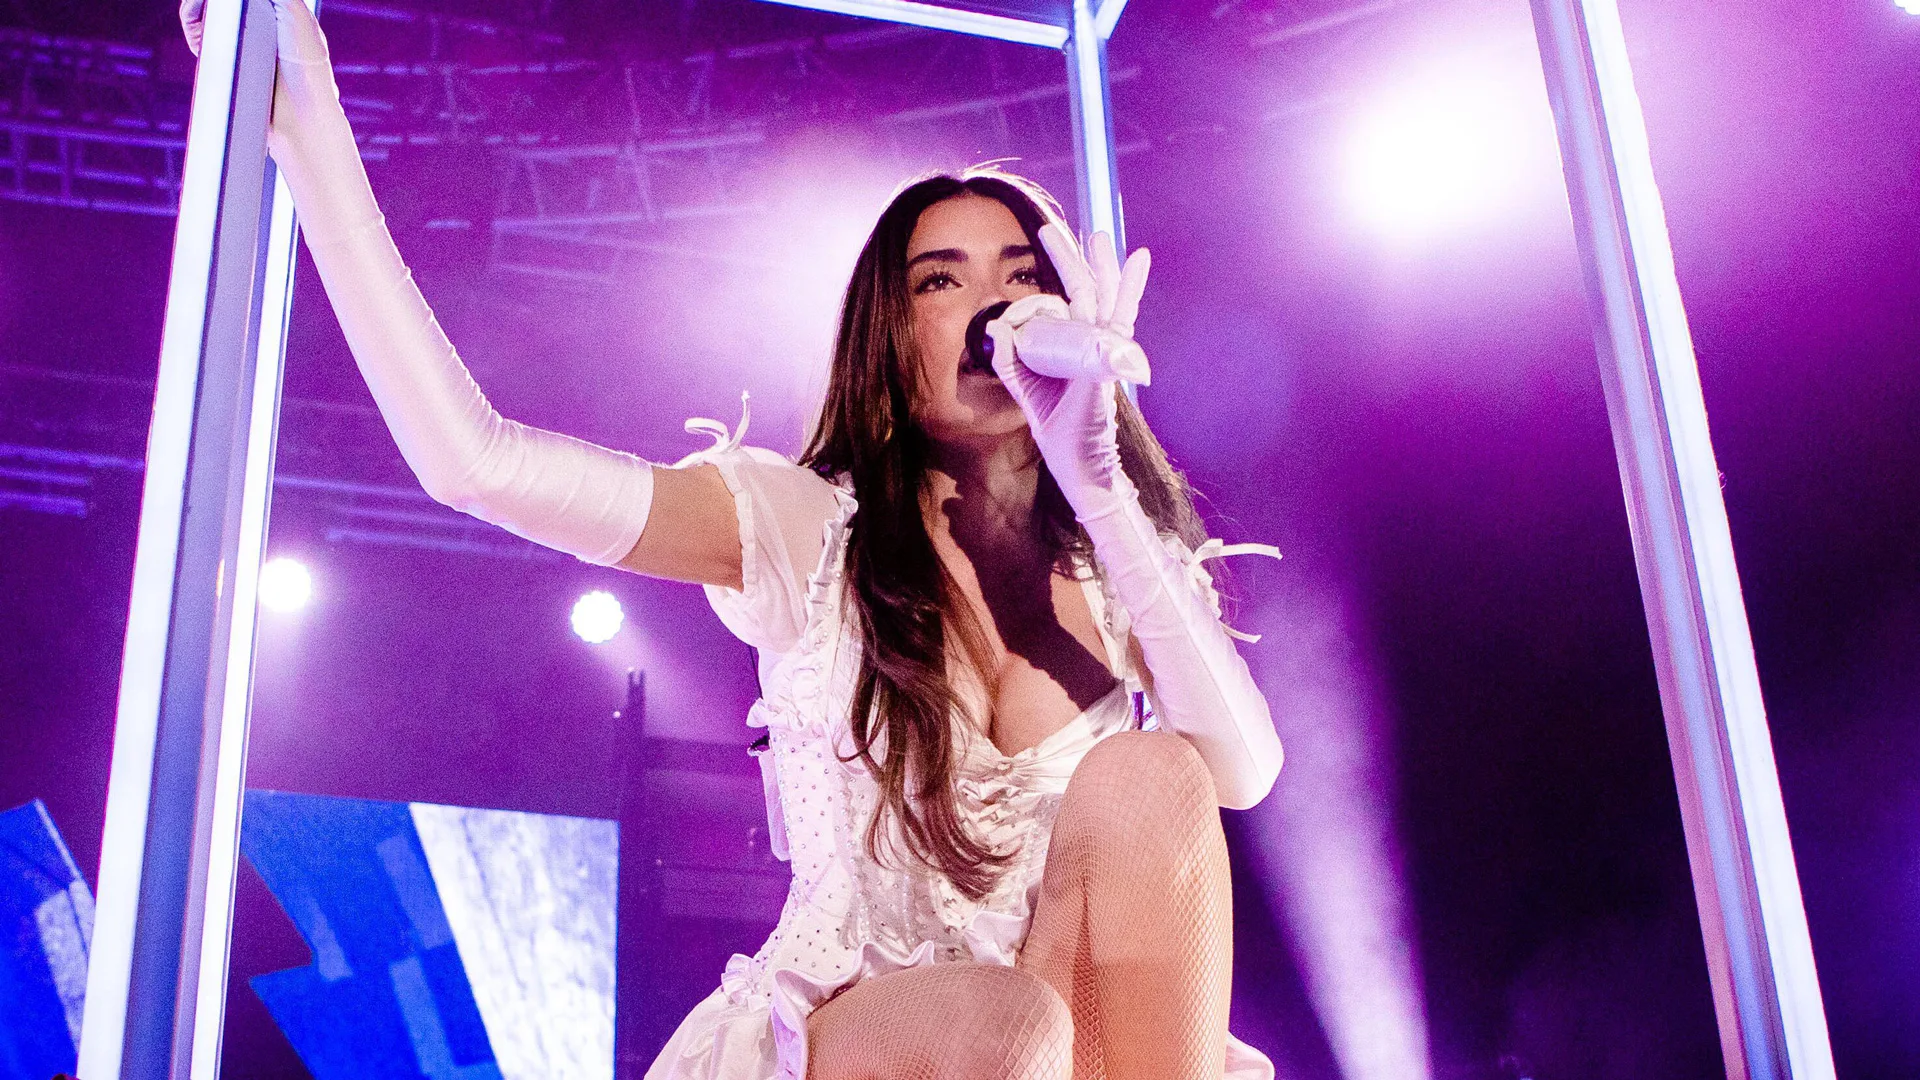 A photograph of the singer Madison Beer performing on stage inside a light box structure. She is holding a microphone, wearing white gloves and a white dress with her hair long and brown. The background is stage lights with purples and blues.